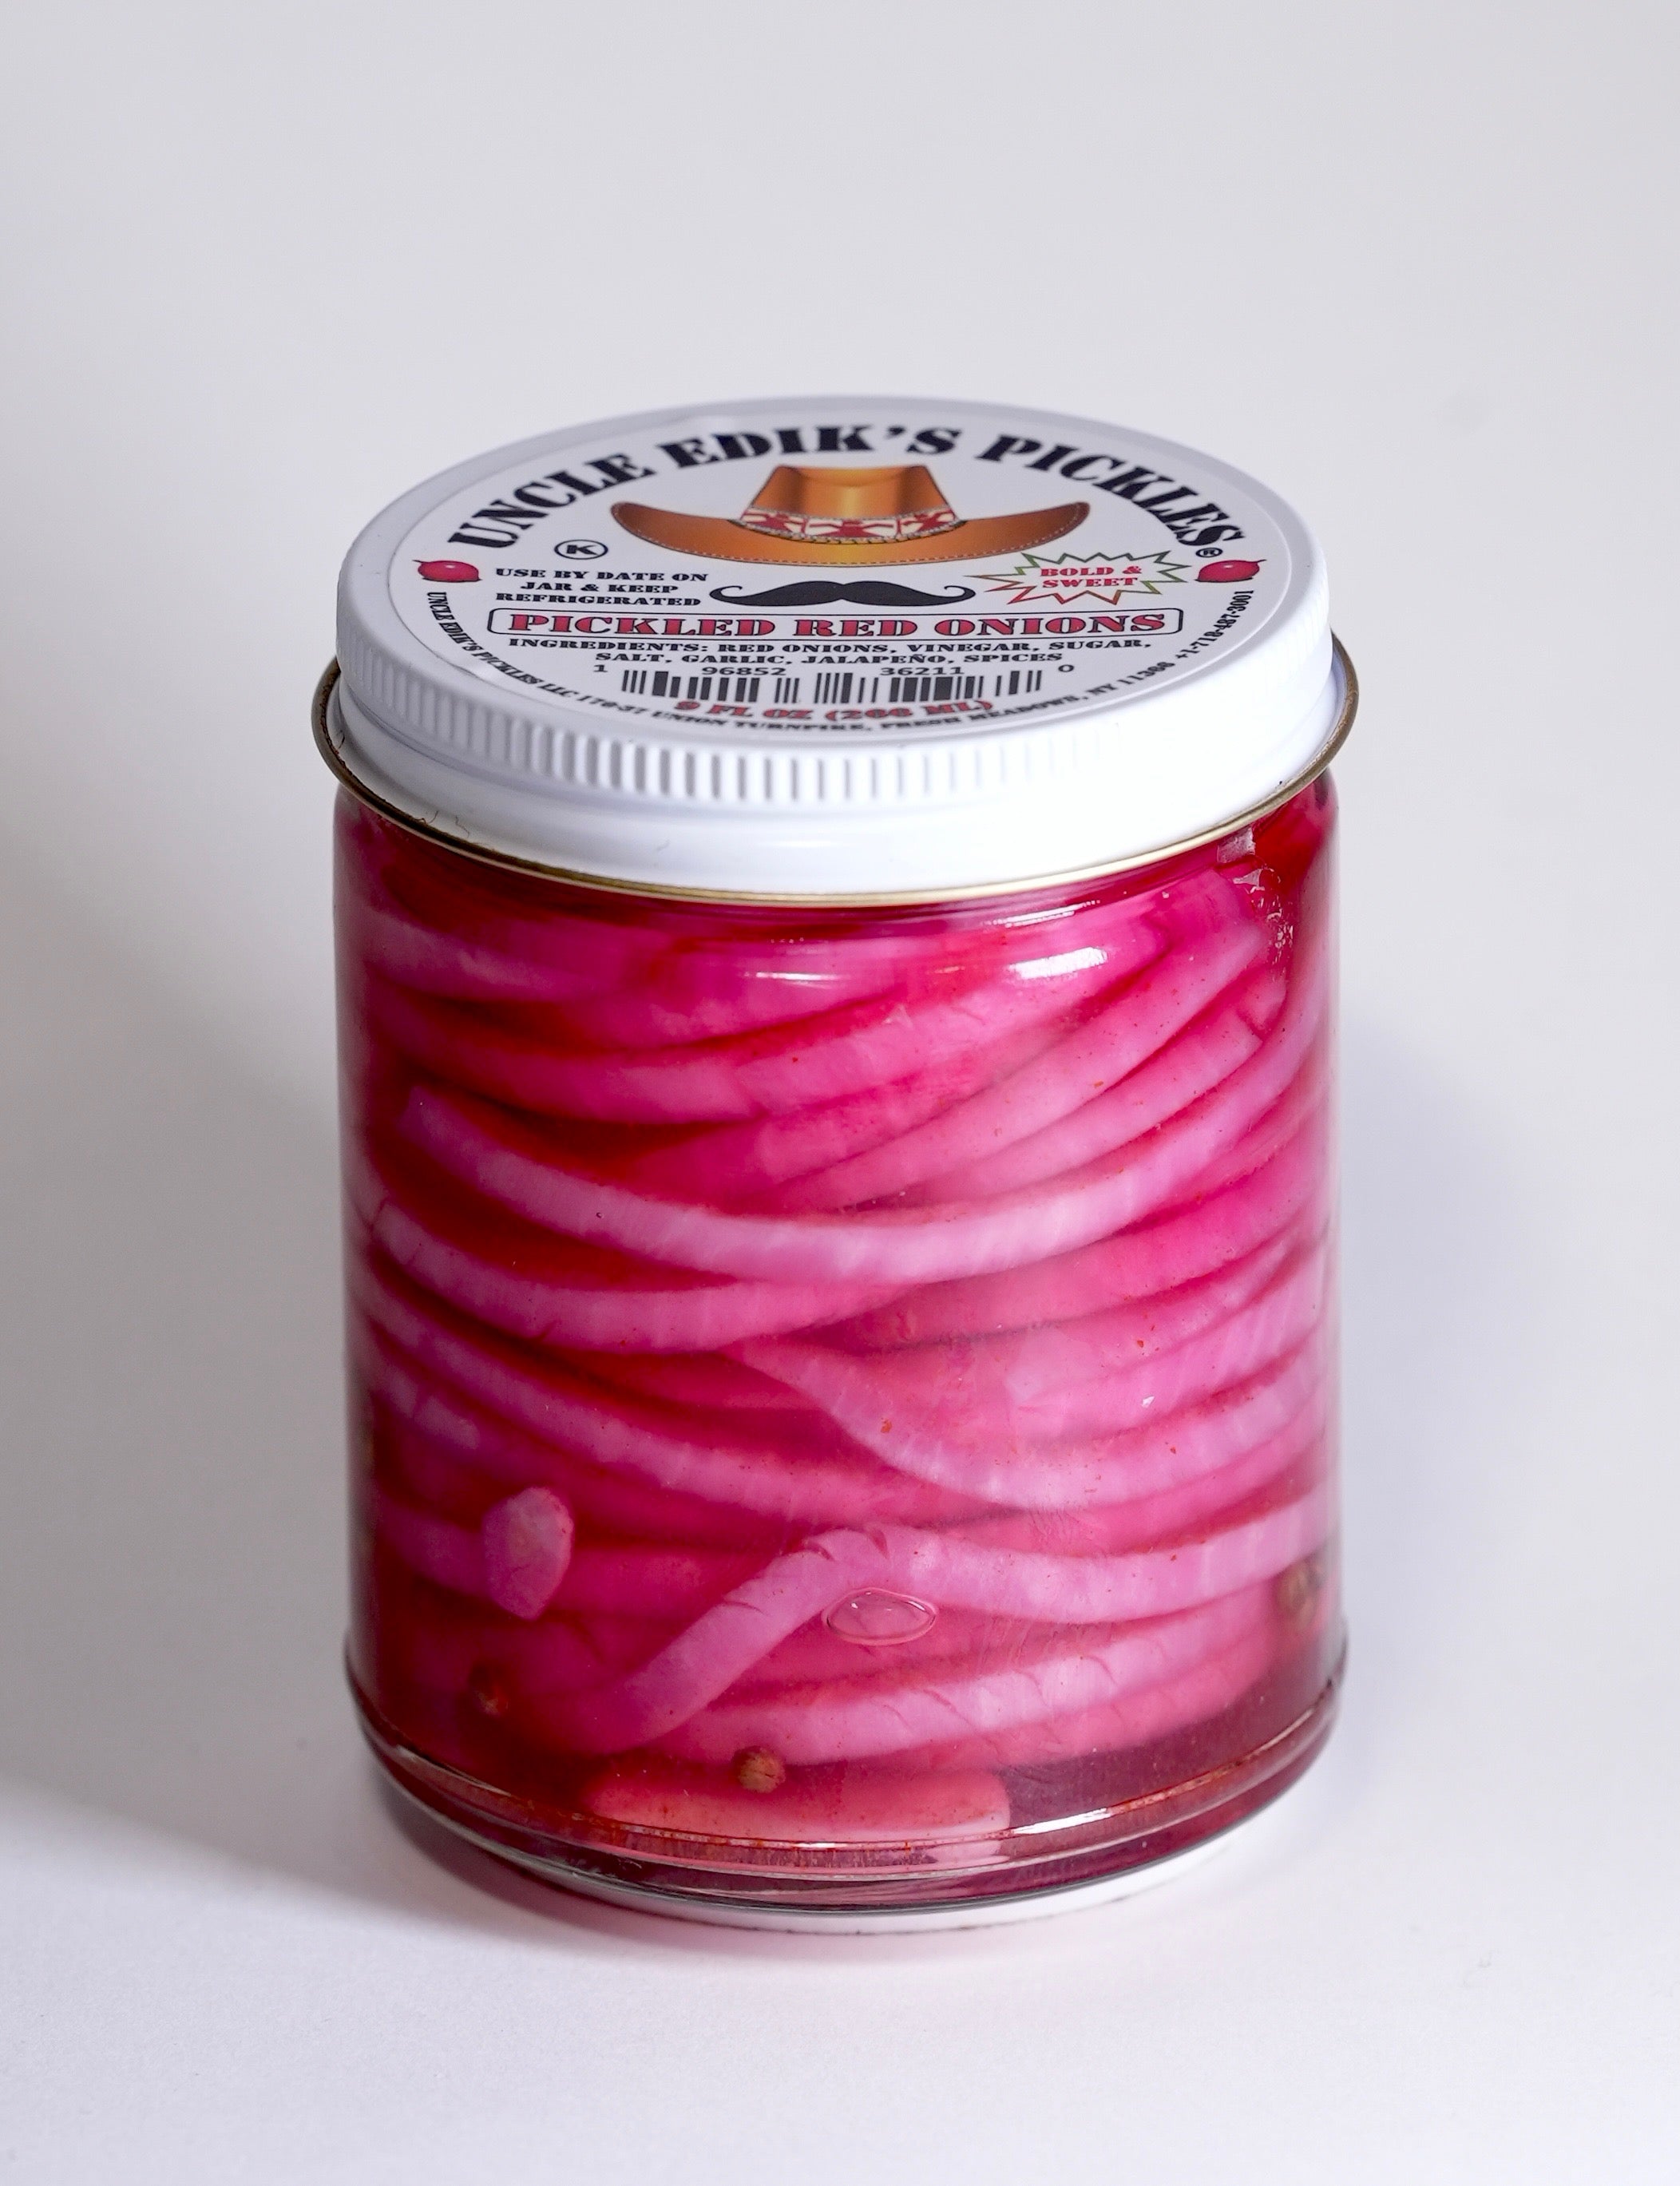 Uncle Edik's Pickles - Red Onions